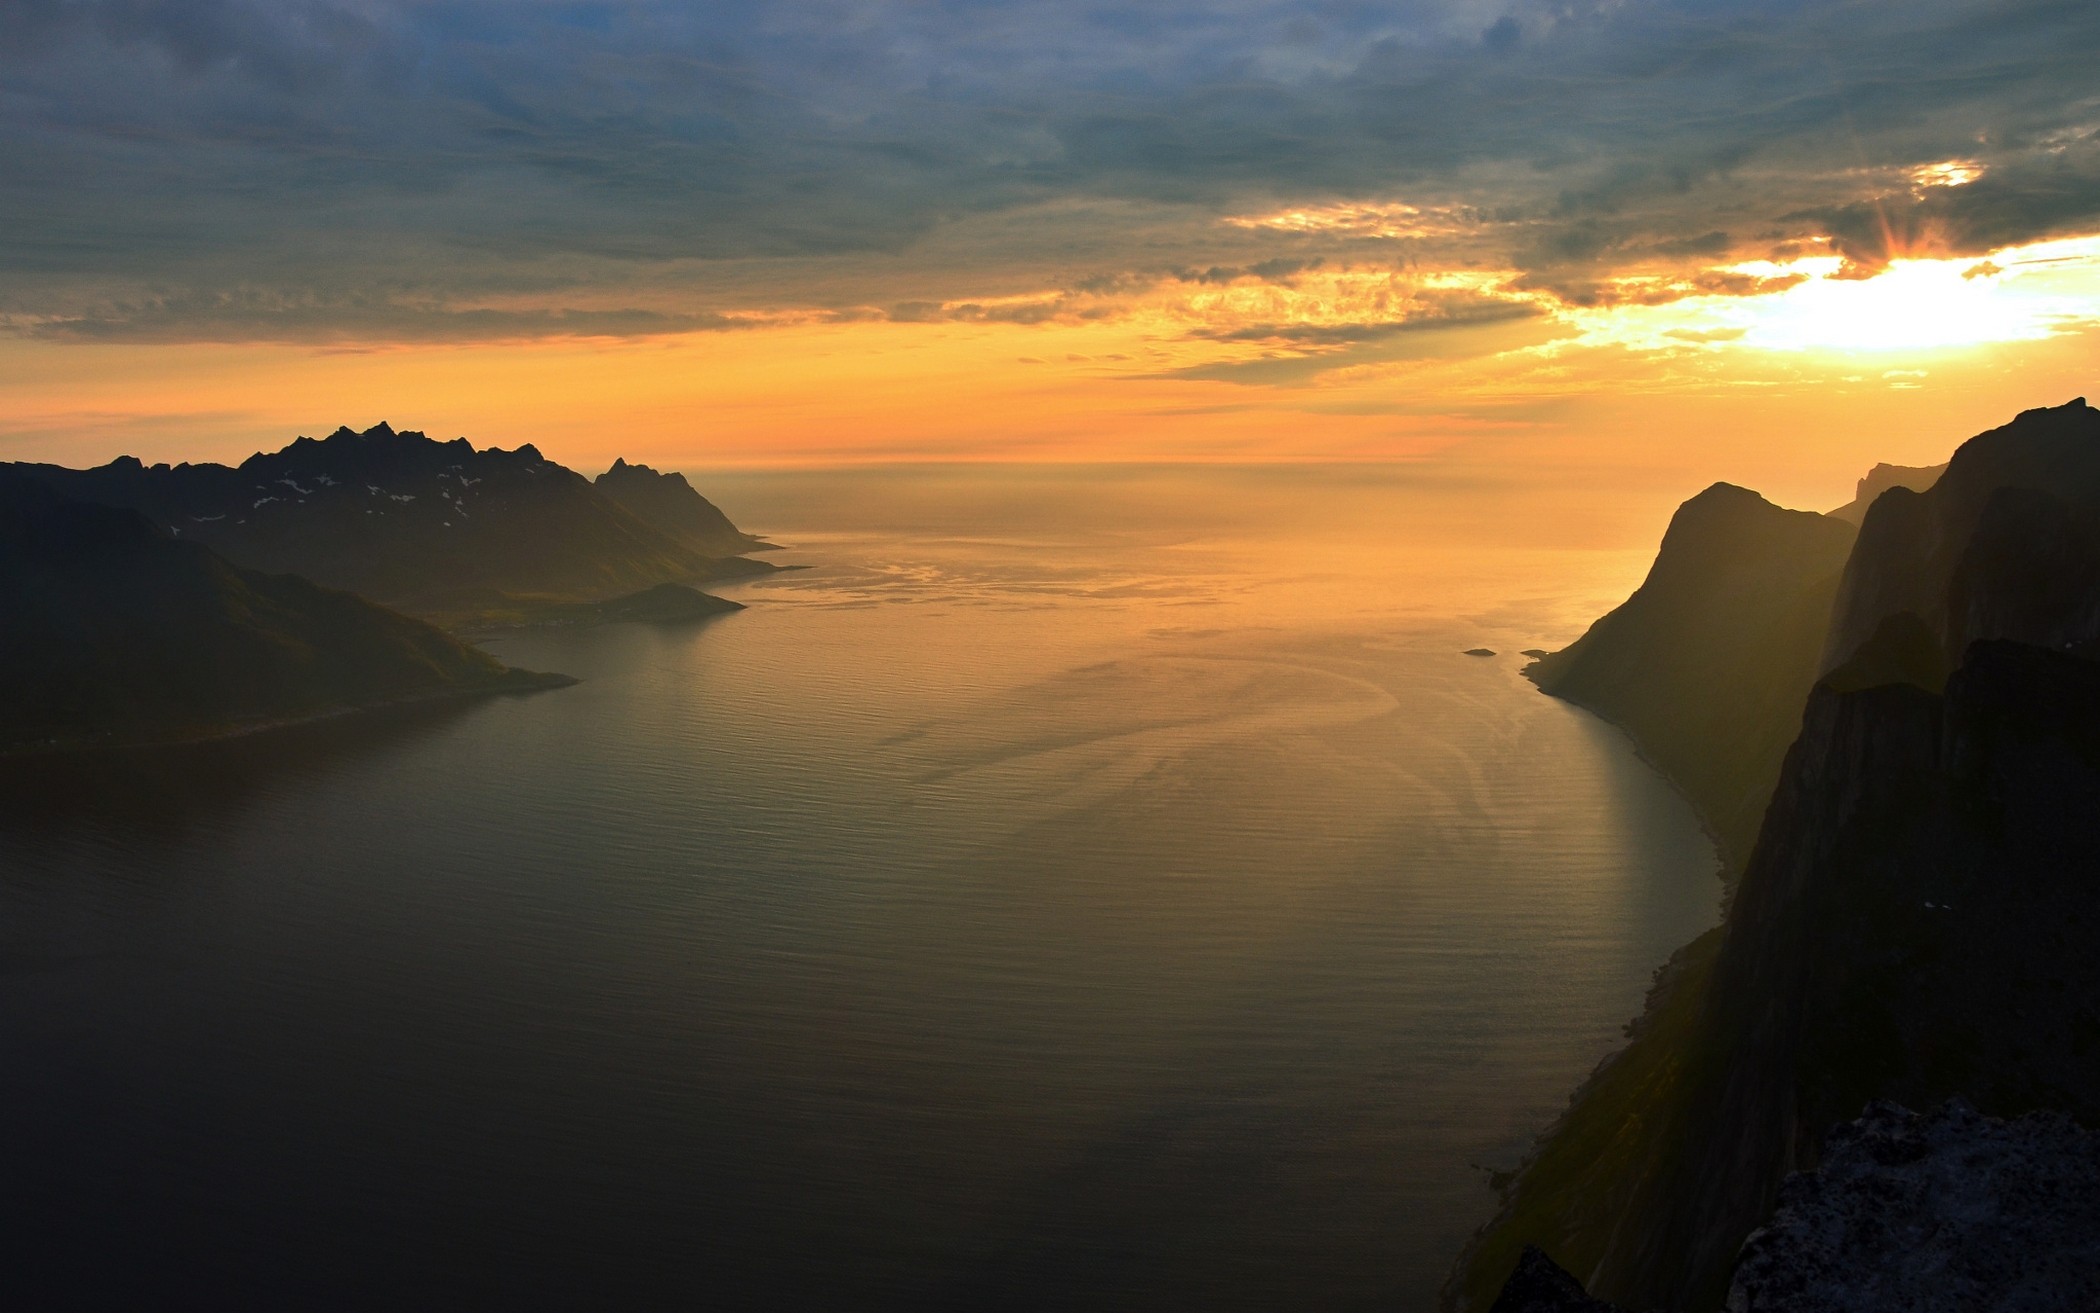 General 2100x1313 nature landscape summer sunset island fjord mountains sky clouds sea Norway sunlight nordic landscapes